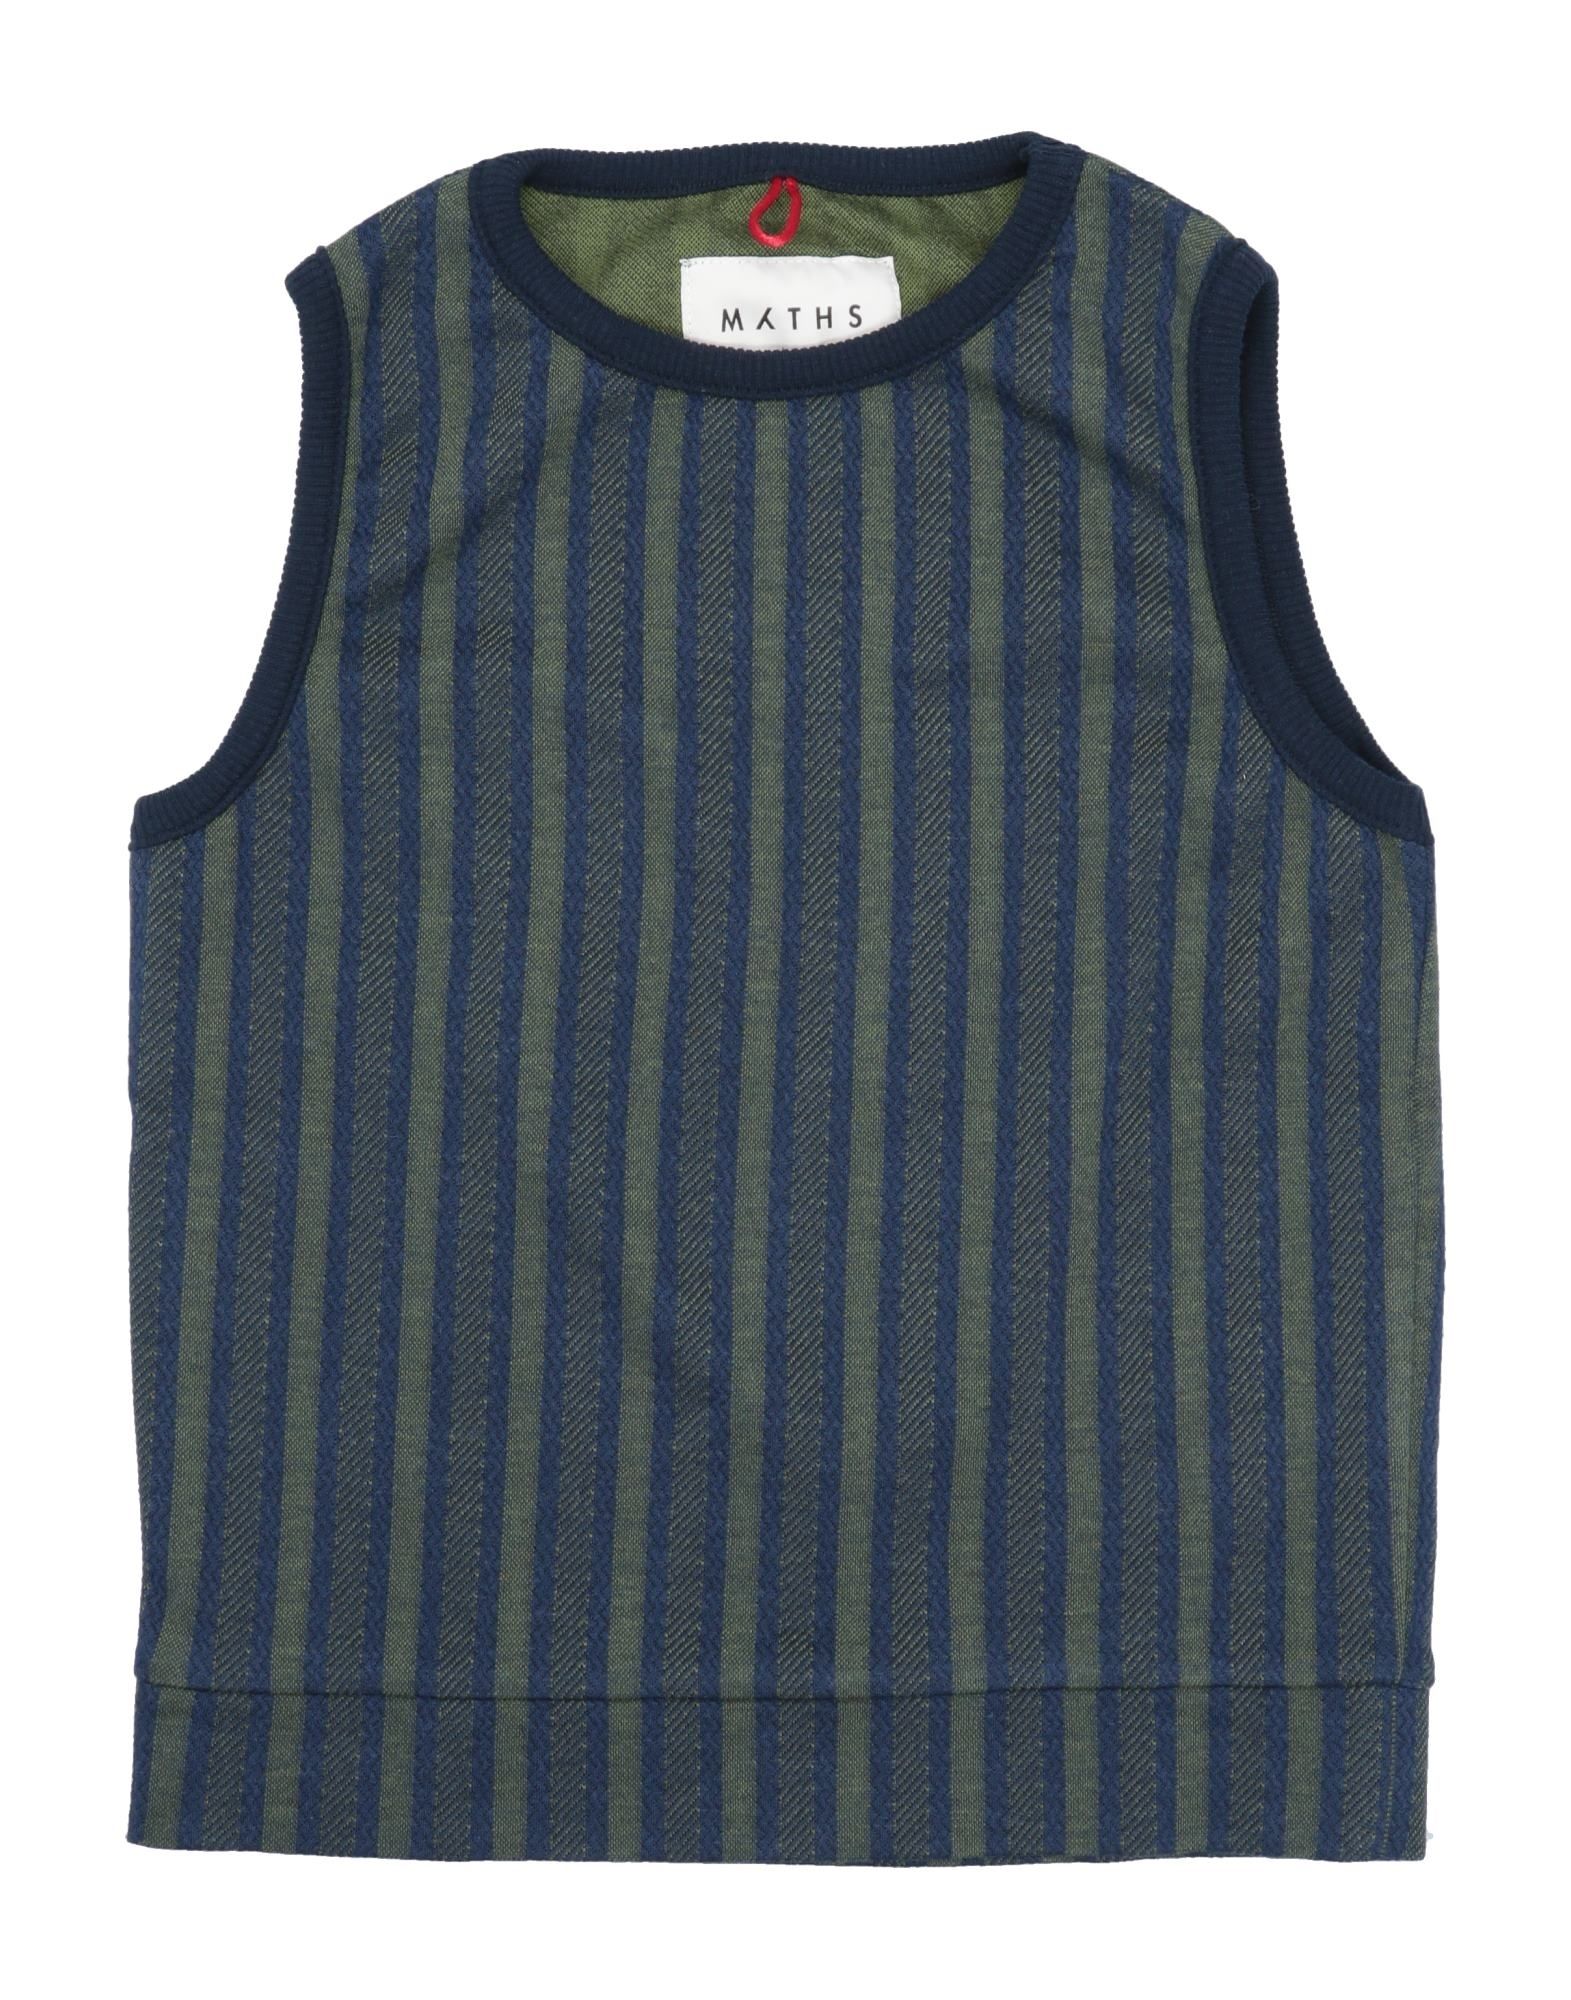 Myths Kids' Sweaters In Green